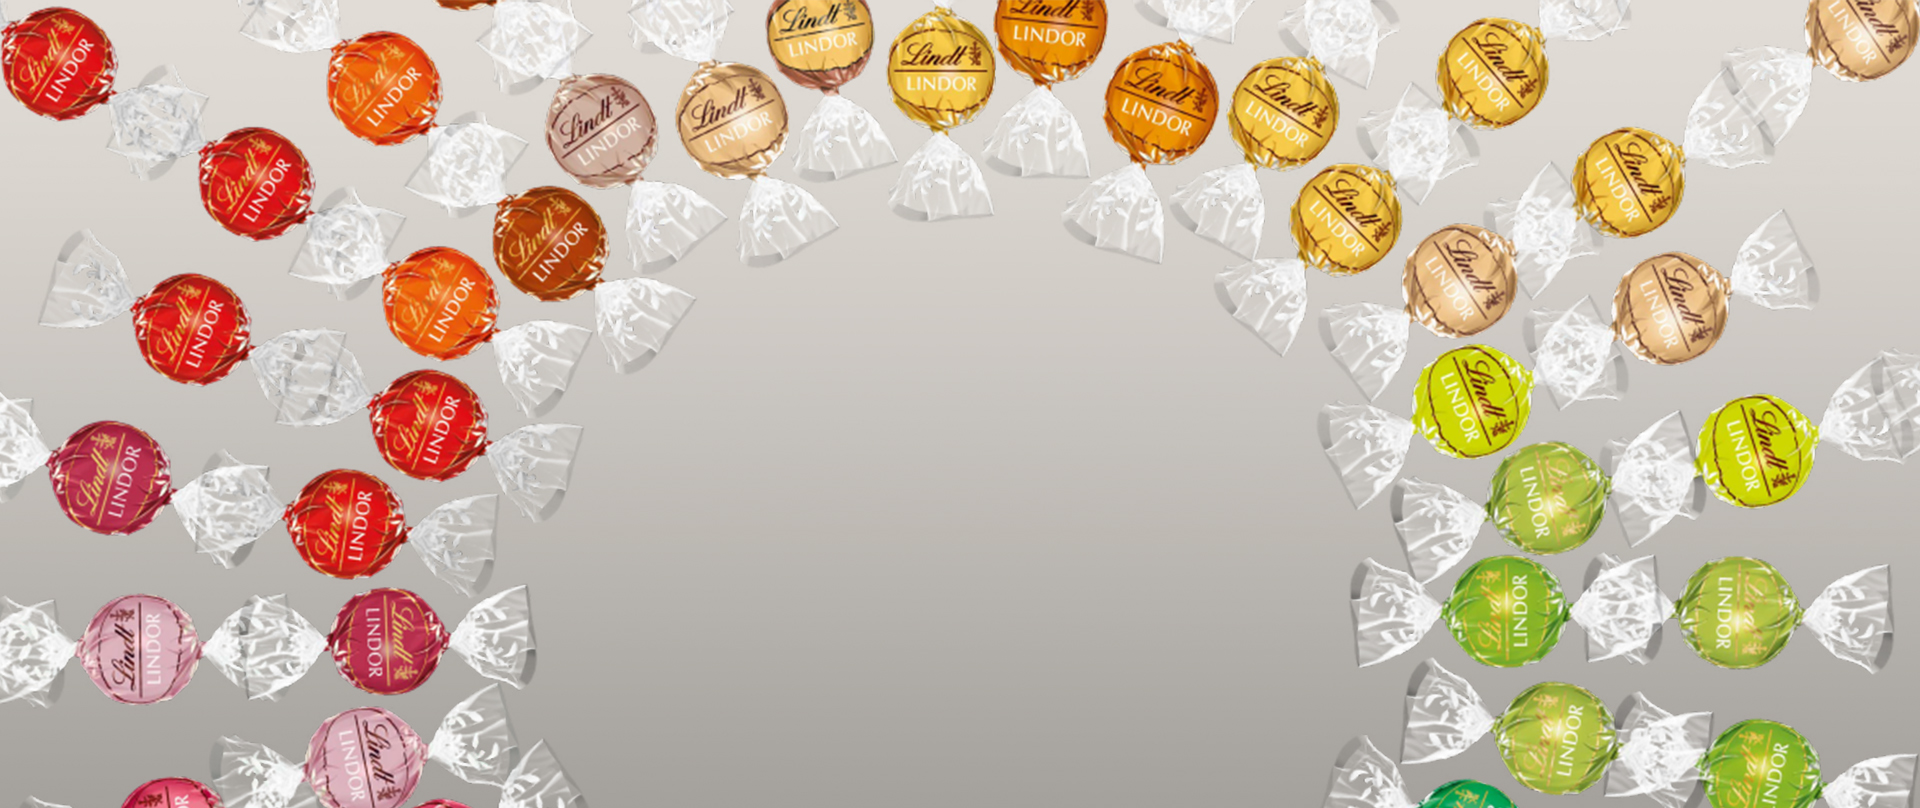 Many LINDOR truffles in different flavors in arranged in circles (Photo)